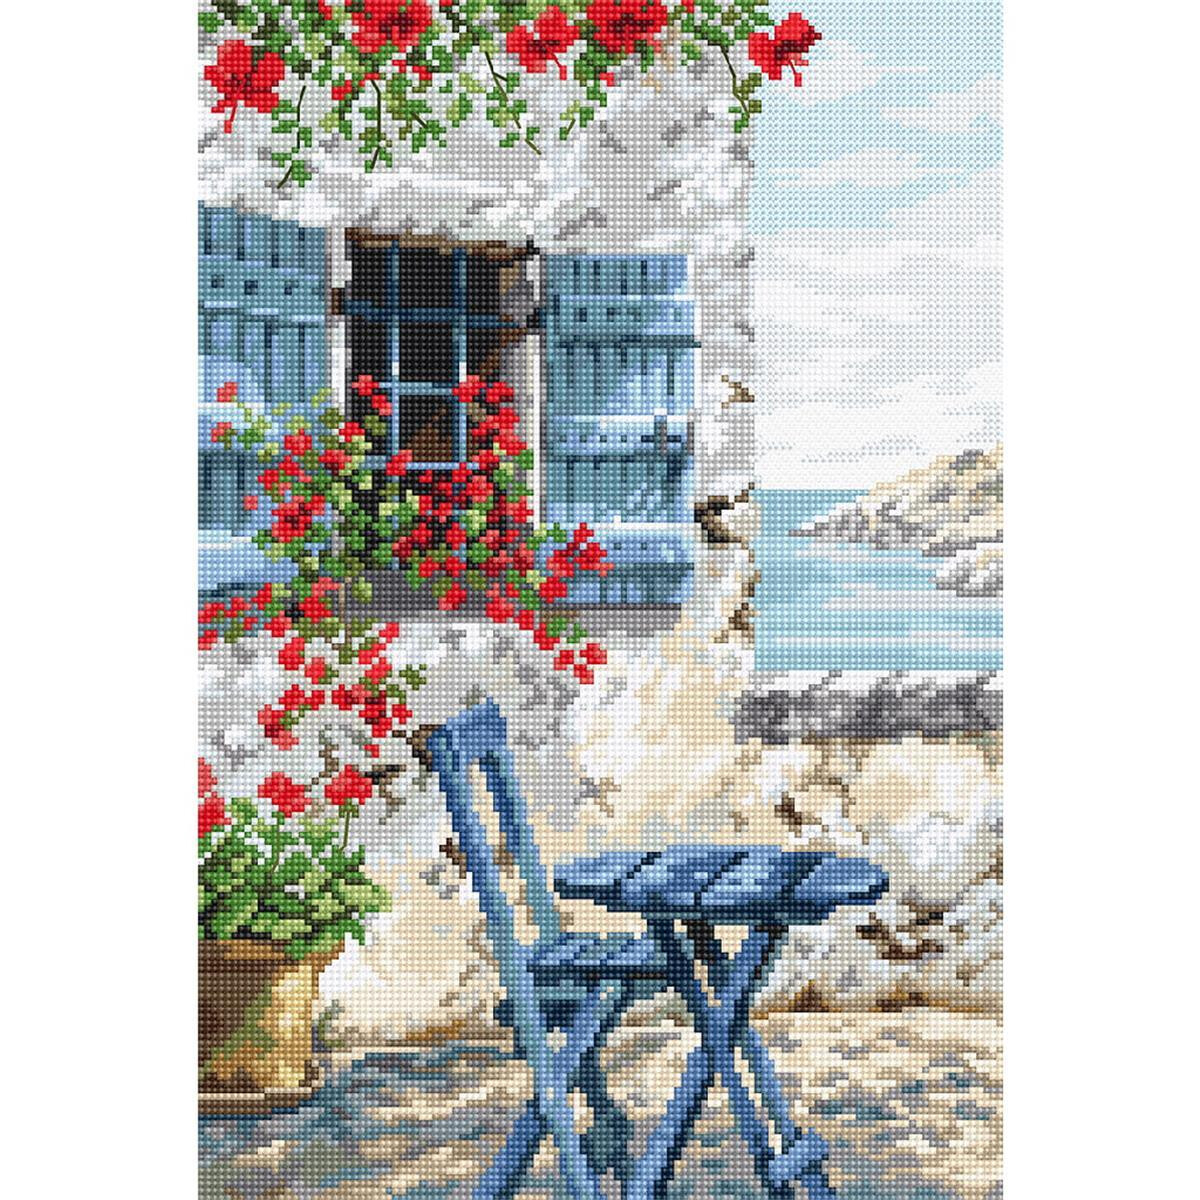 A lively embroidery pack from Letistitch shows a terrace...